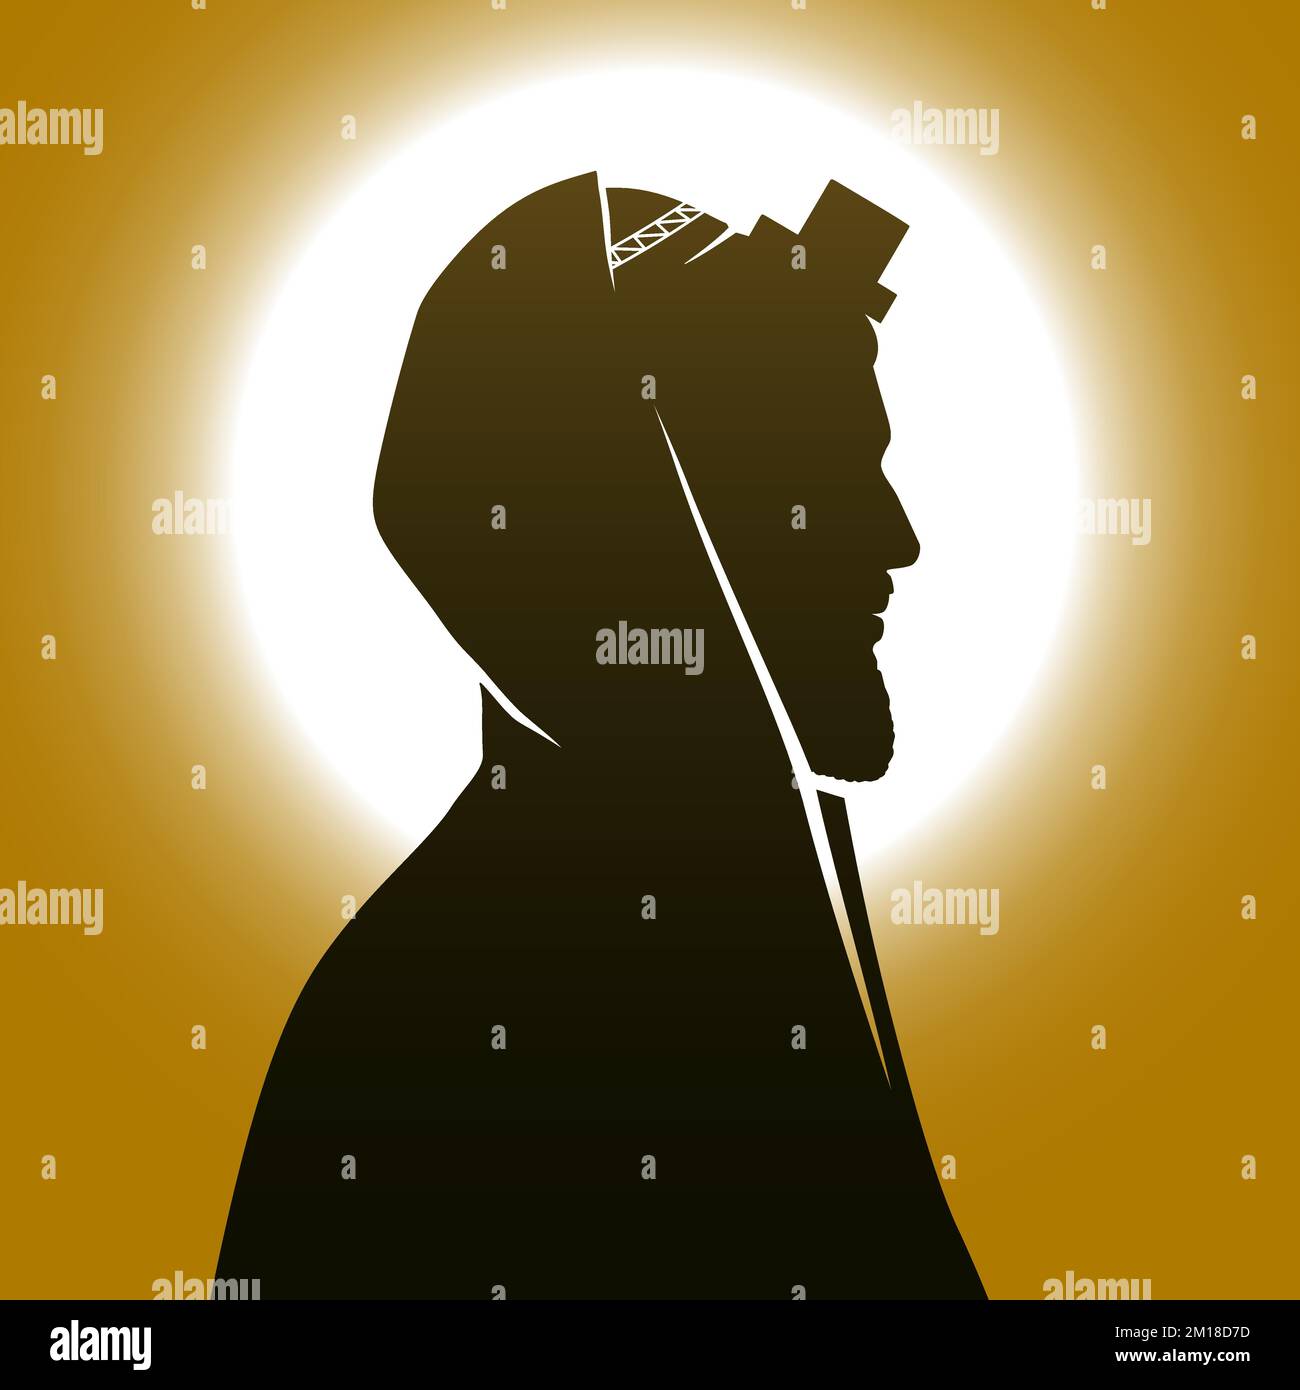 Jewish man with Kippah, Tallit, and Tefillin, praying on a mystical sunny background, vector illustration. Stock Vector